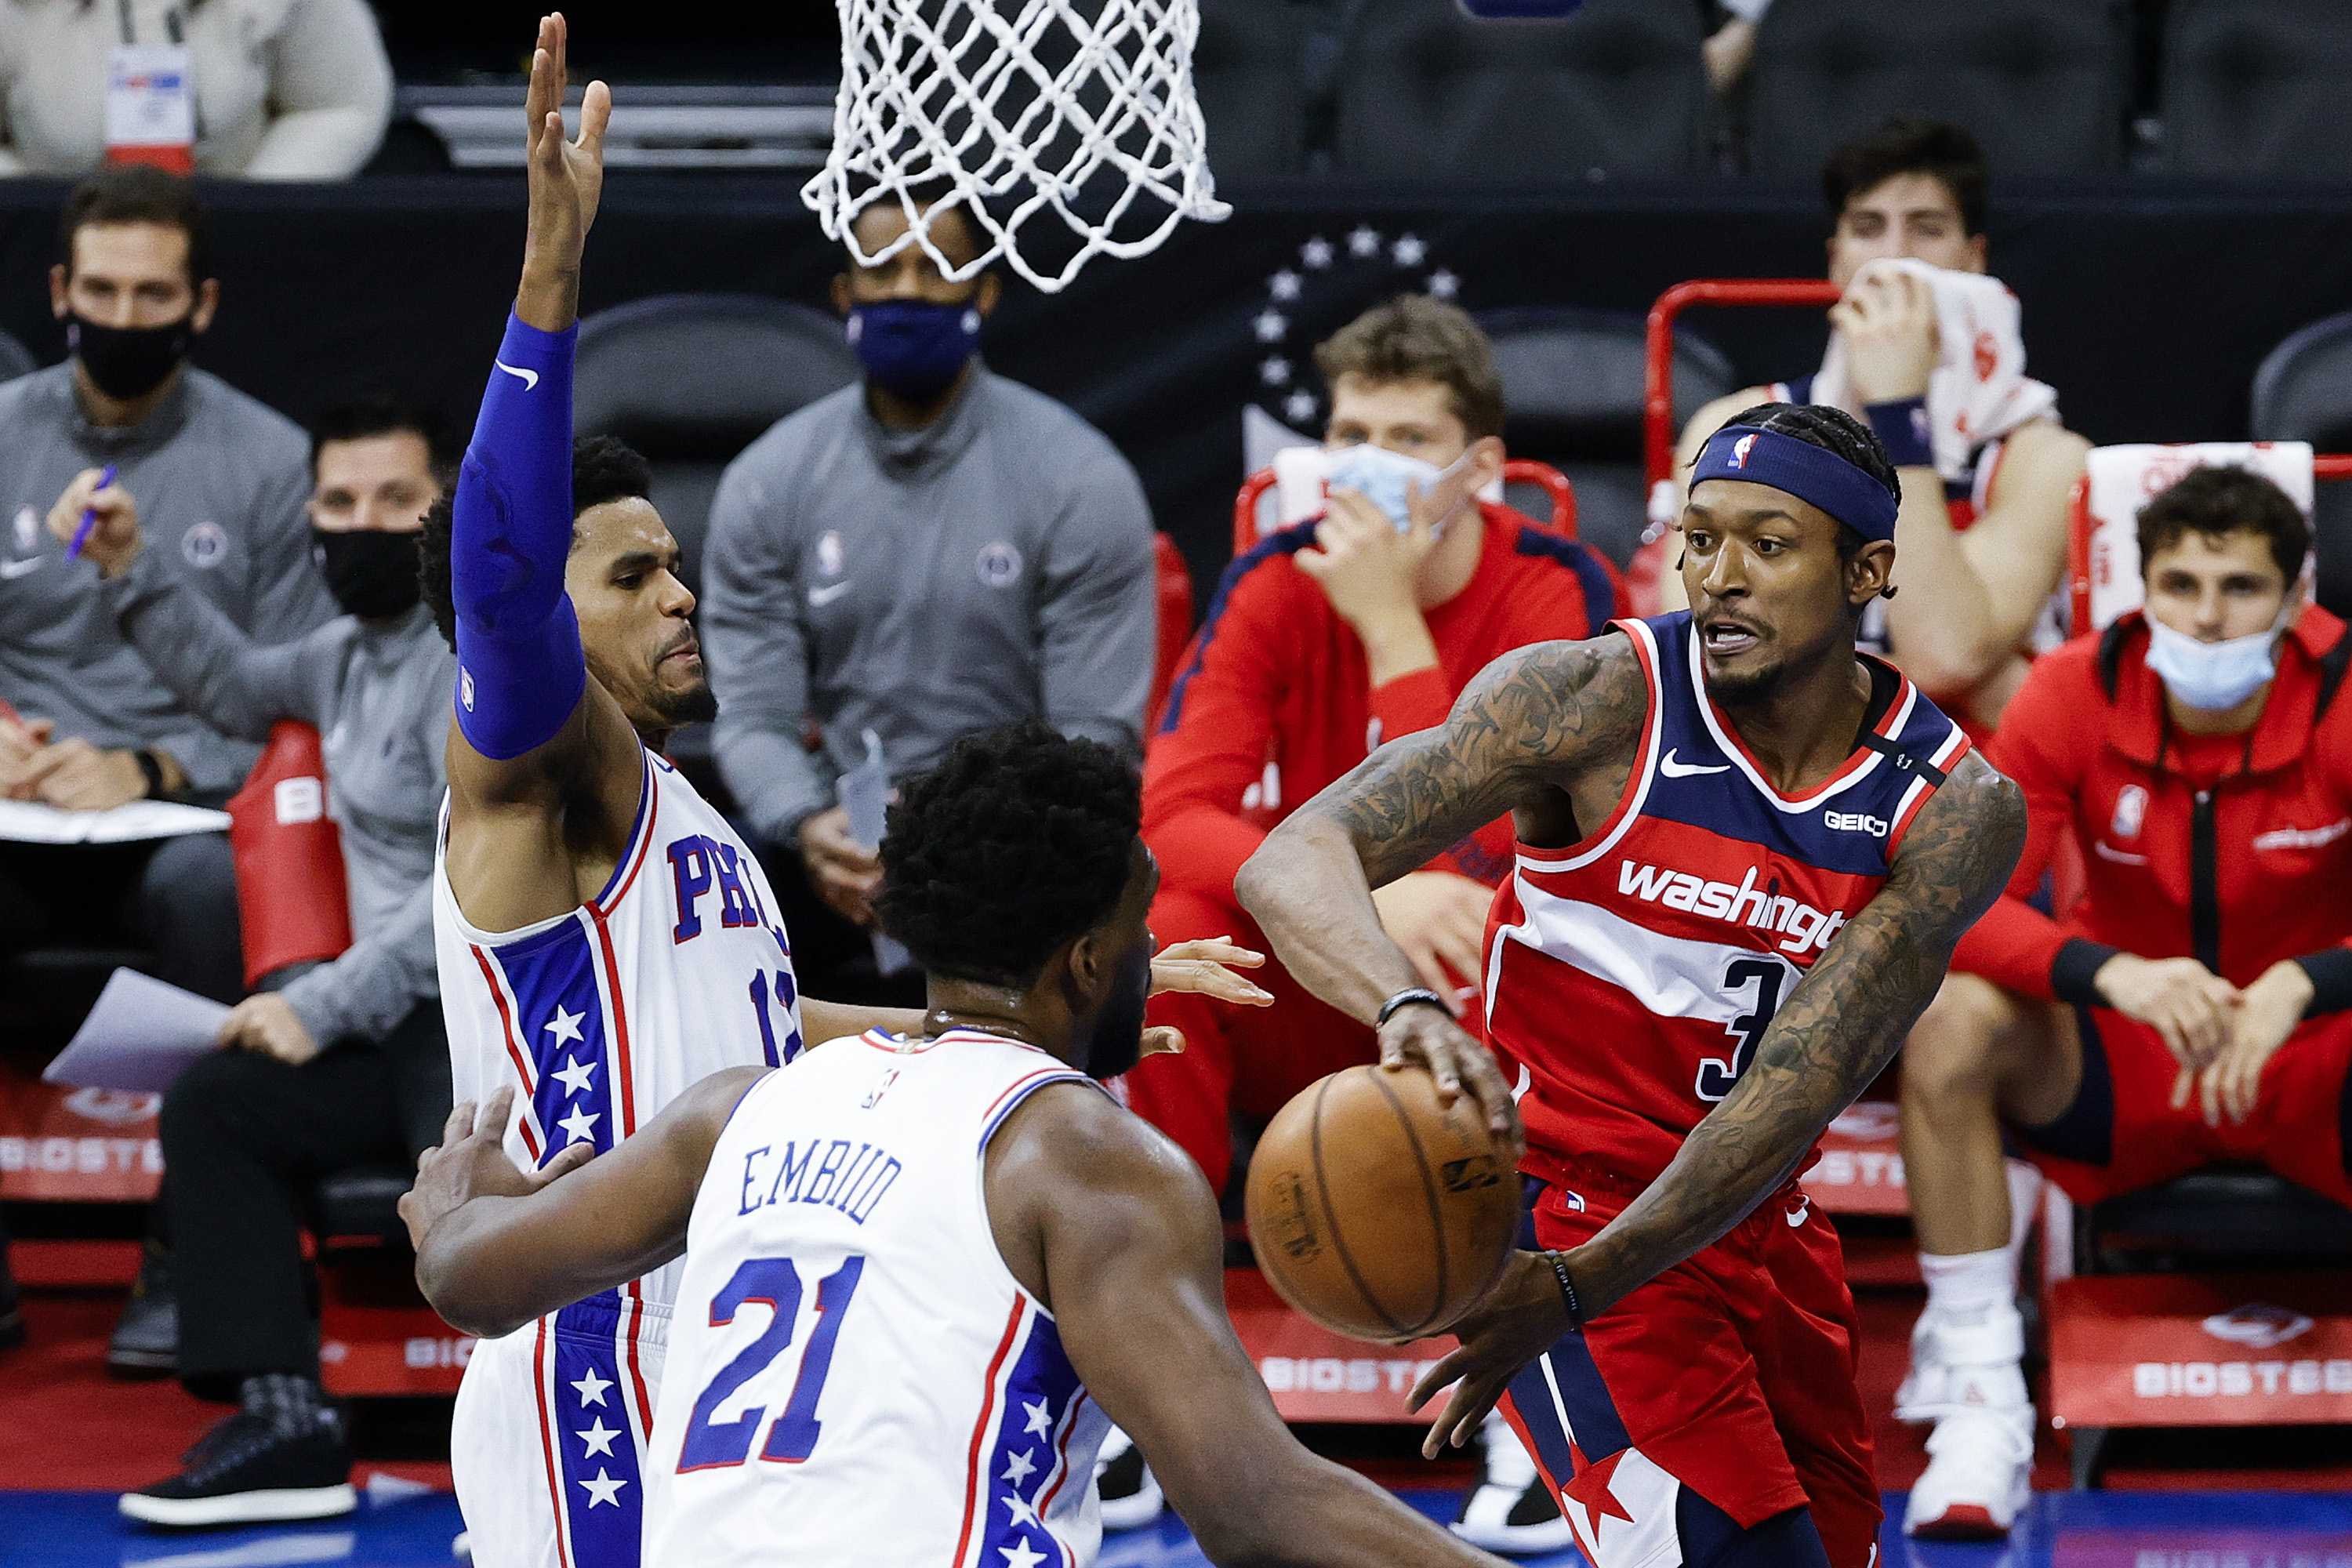 Philadelphia 76ers vs Washington Wizards free live stream, Game 1 score, odds, time, TV channel, how to watch NBA playoffs online (5/23/21)